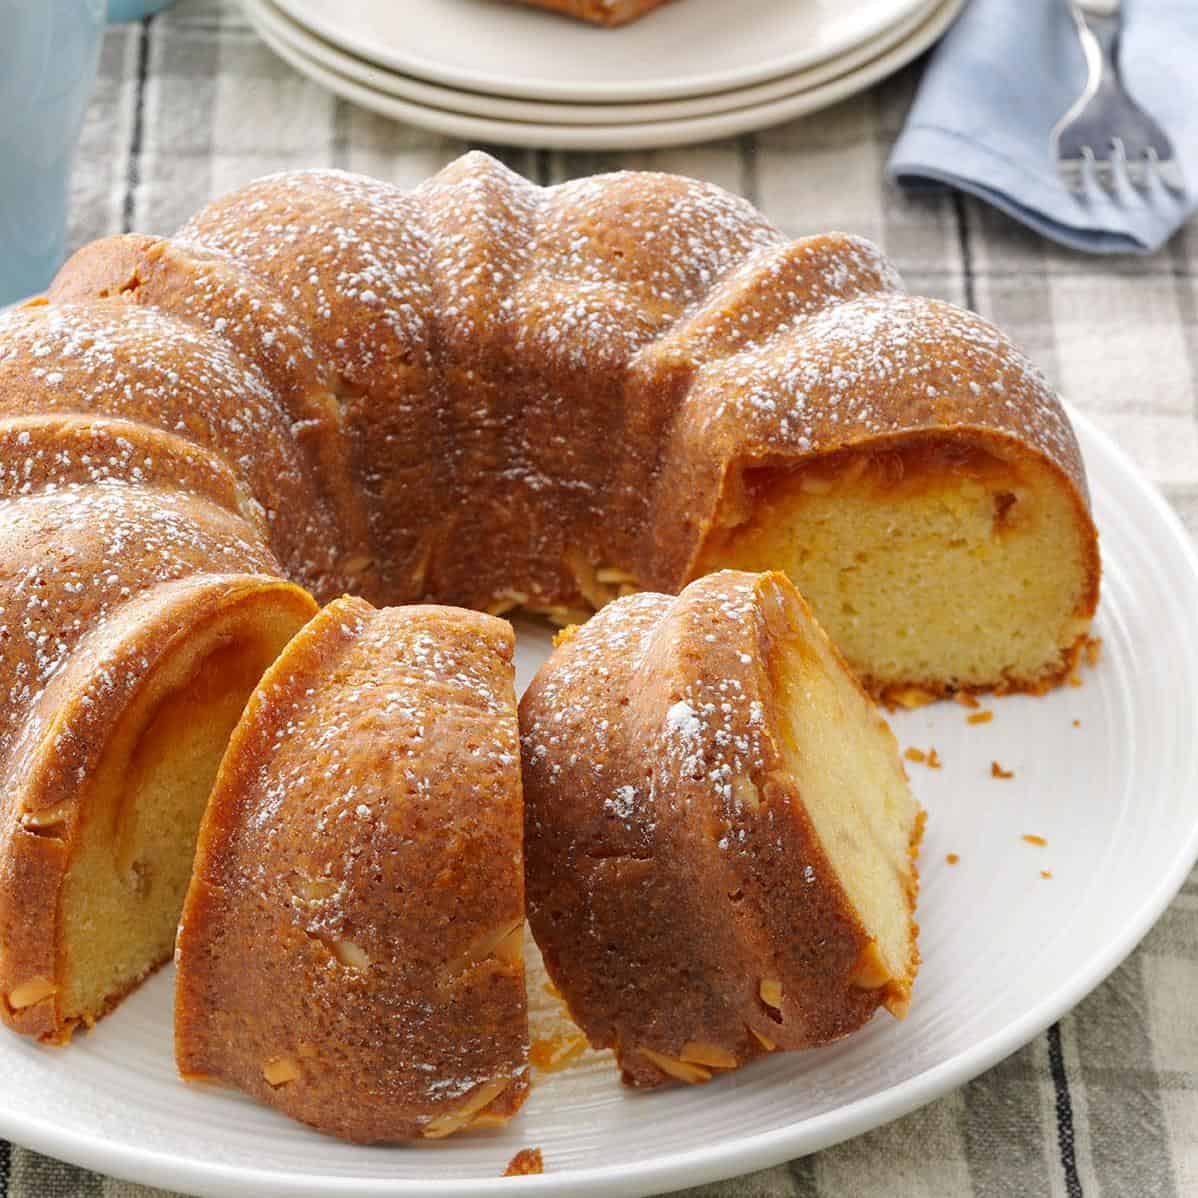  The slight crunch of the almonds intertwined with the tender crumb of the pound cake creates a perfect balance of texture.